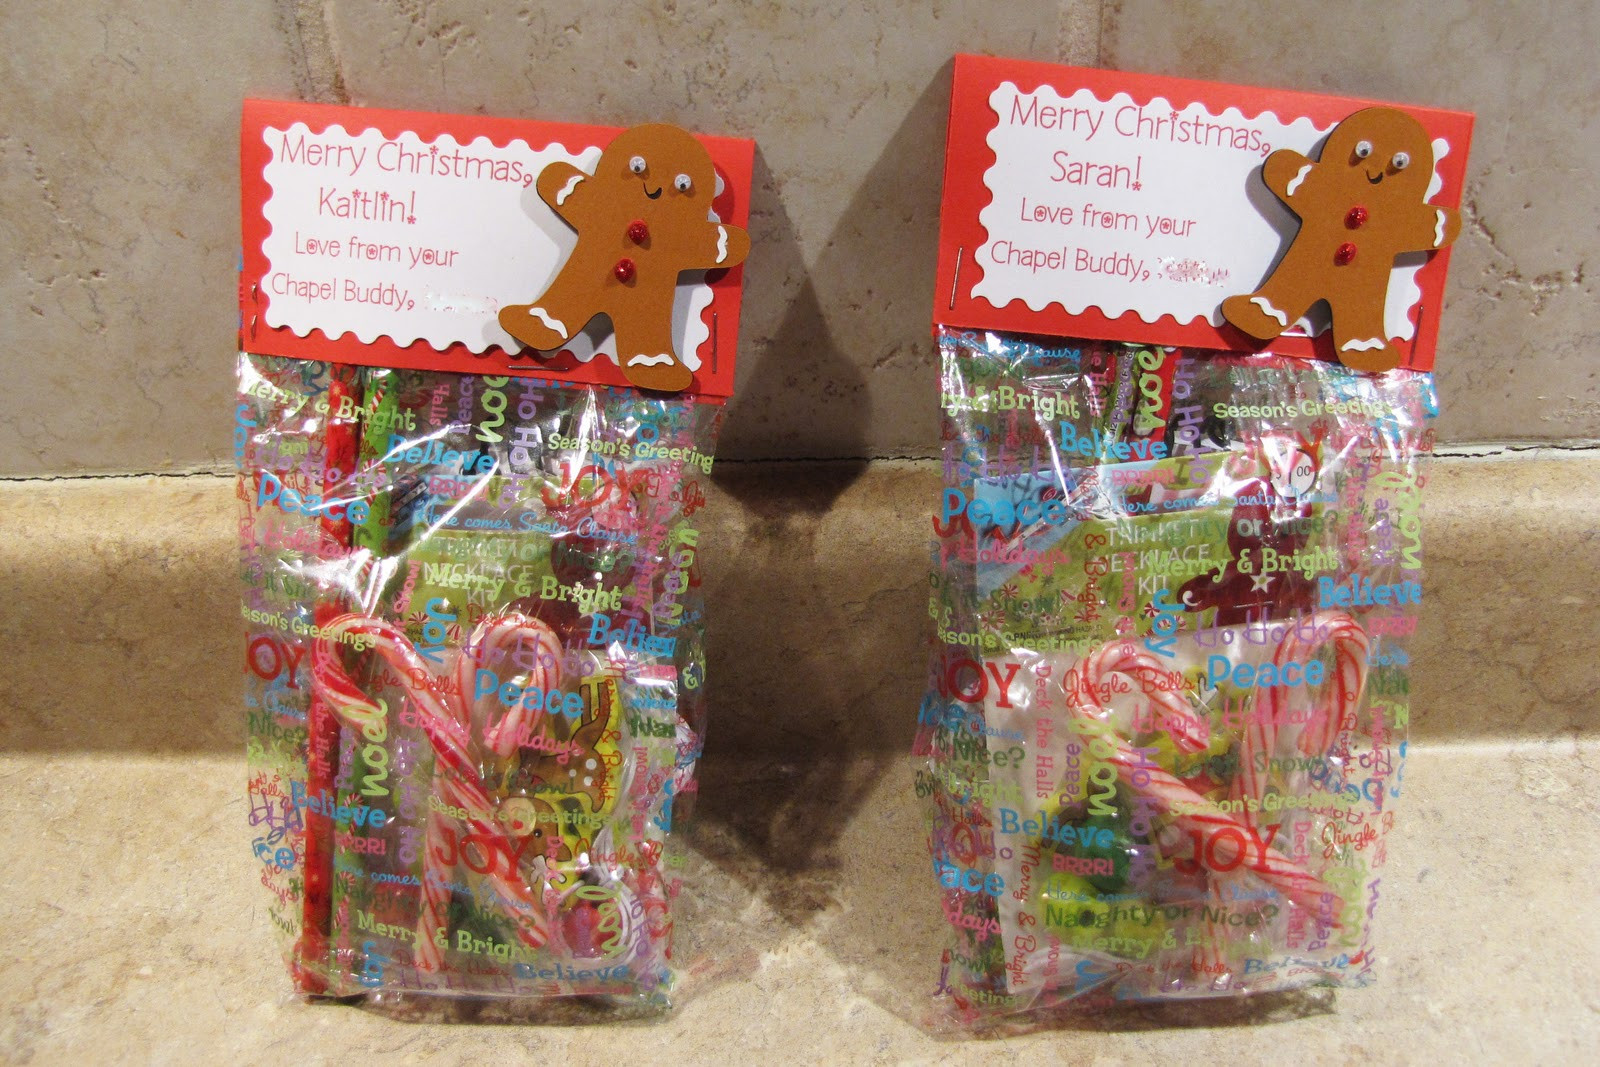 Christmas Candy Bags Ideas
 Jen s Happy Place Chapel Buddy Christmas Treat Bags